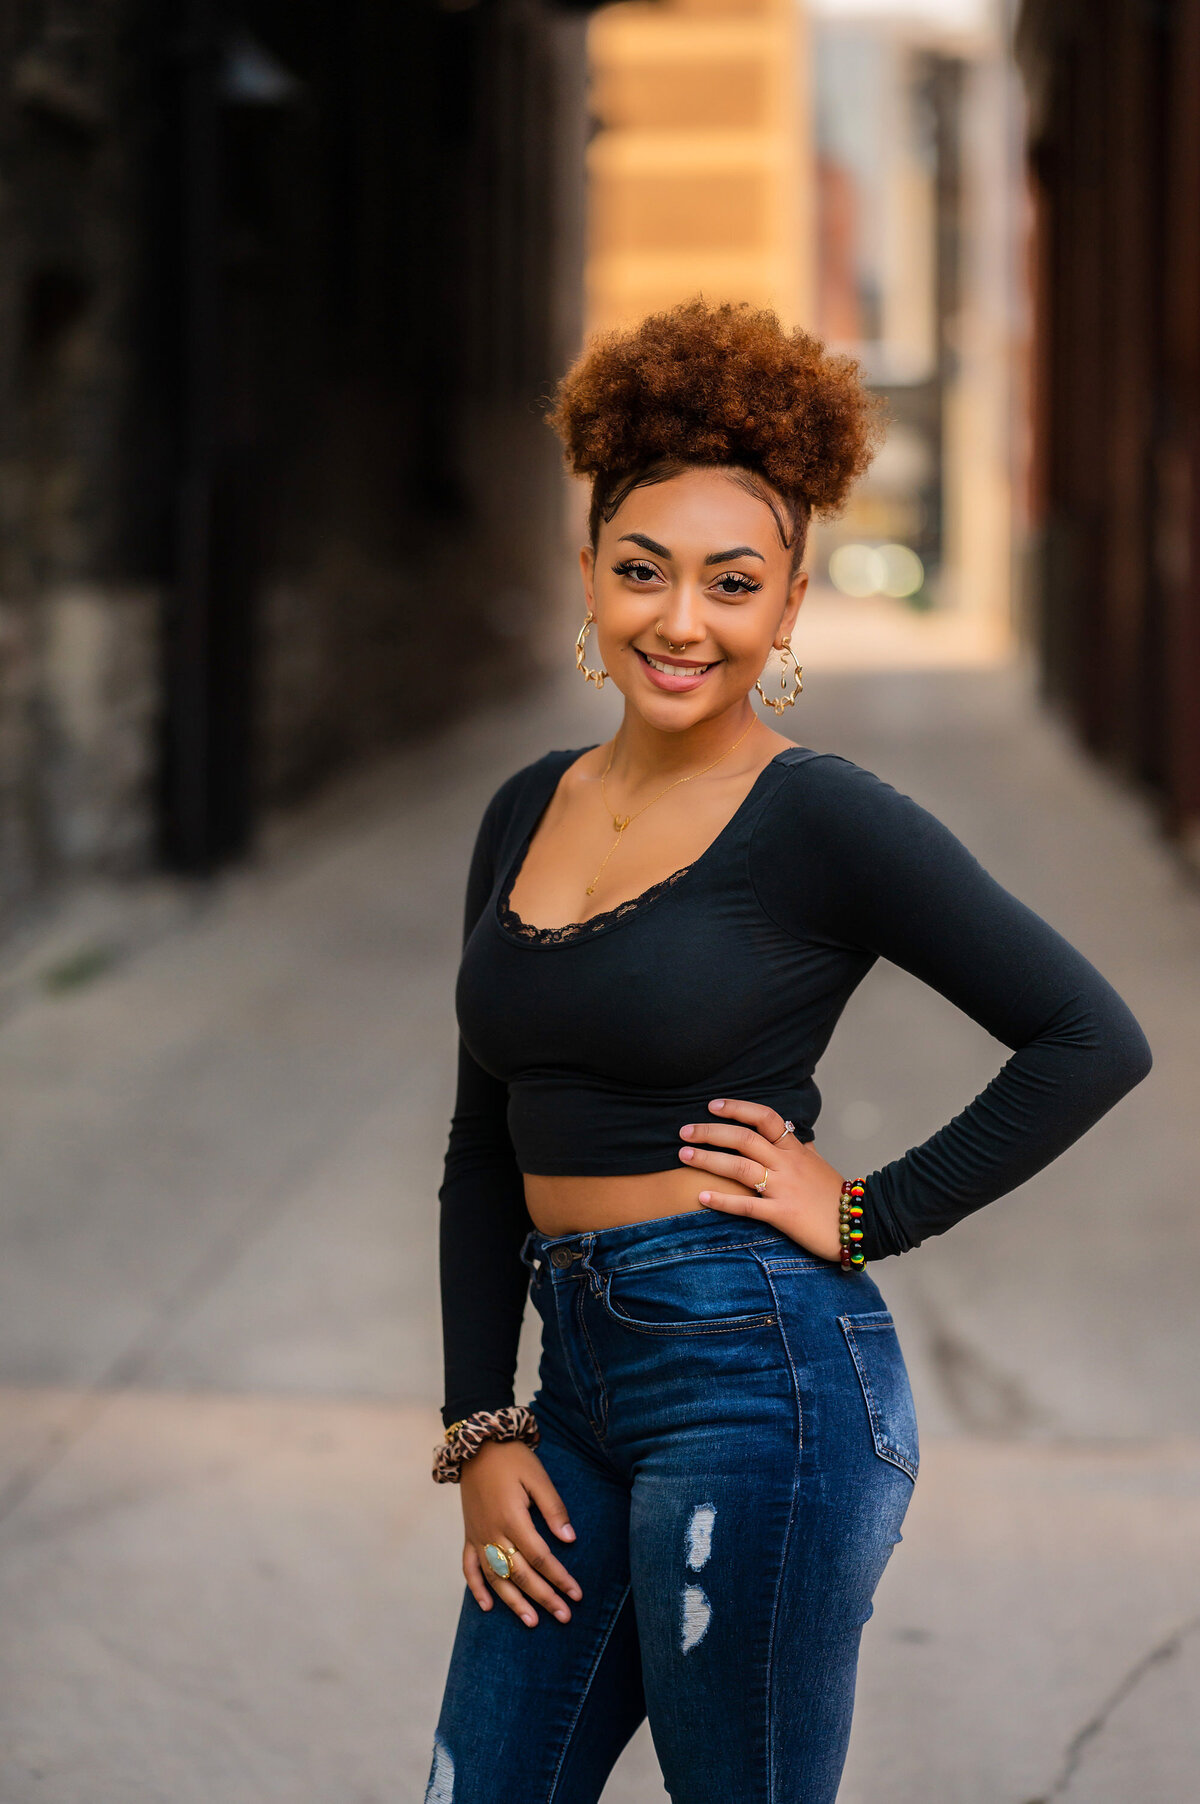 A Catholic Memorial High School senior poses in a bright alleyway for her portrait.